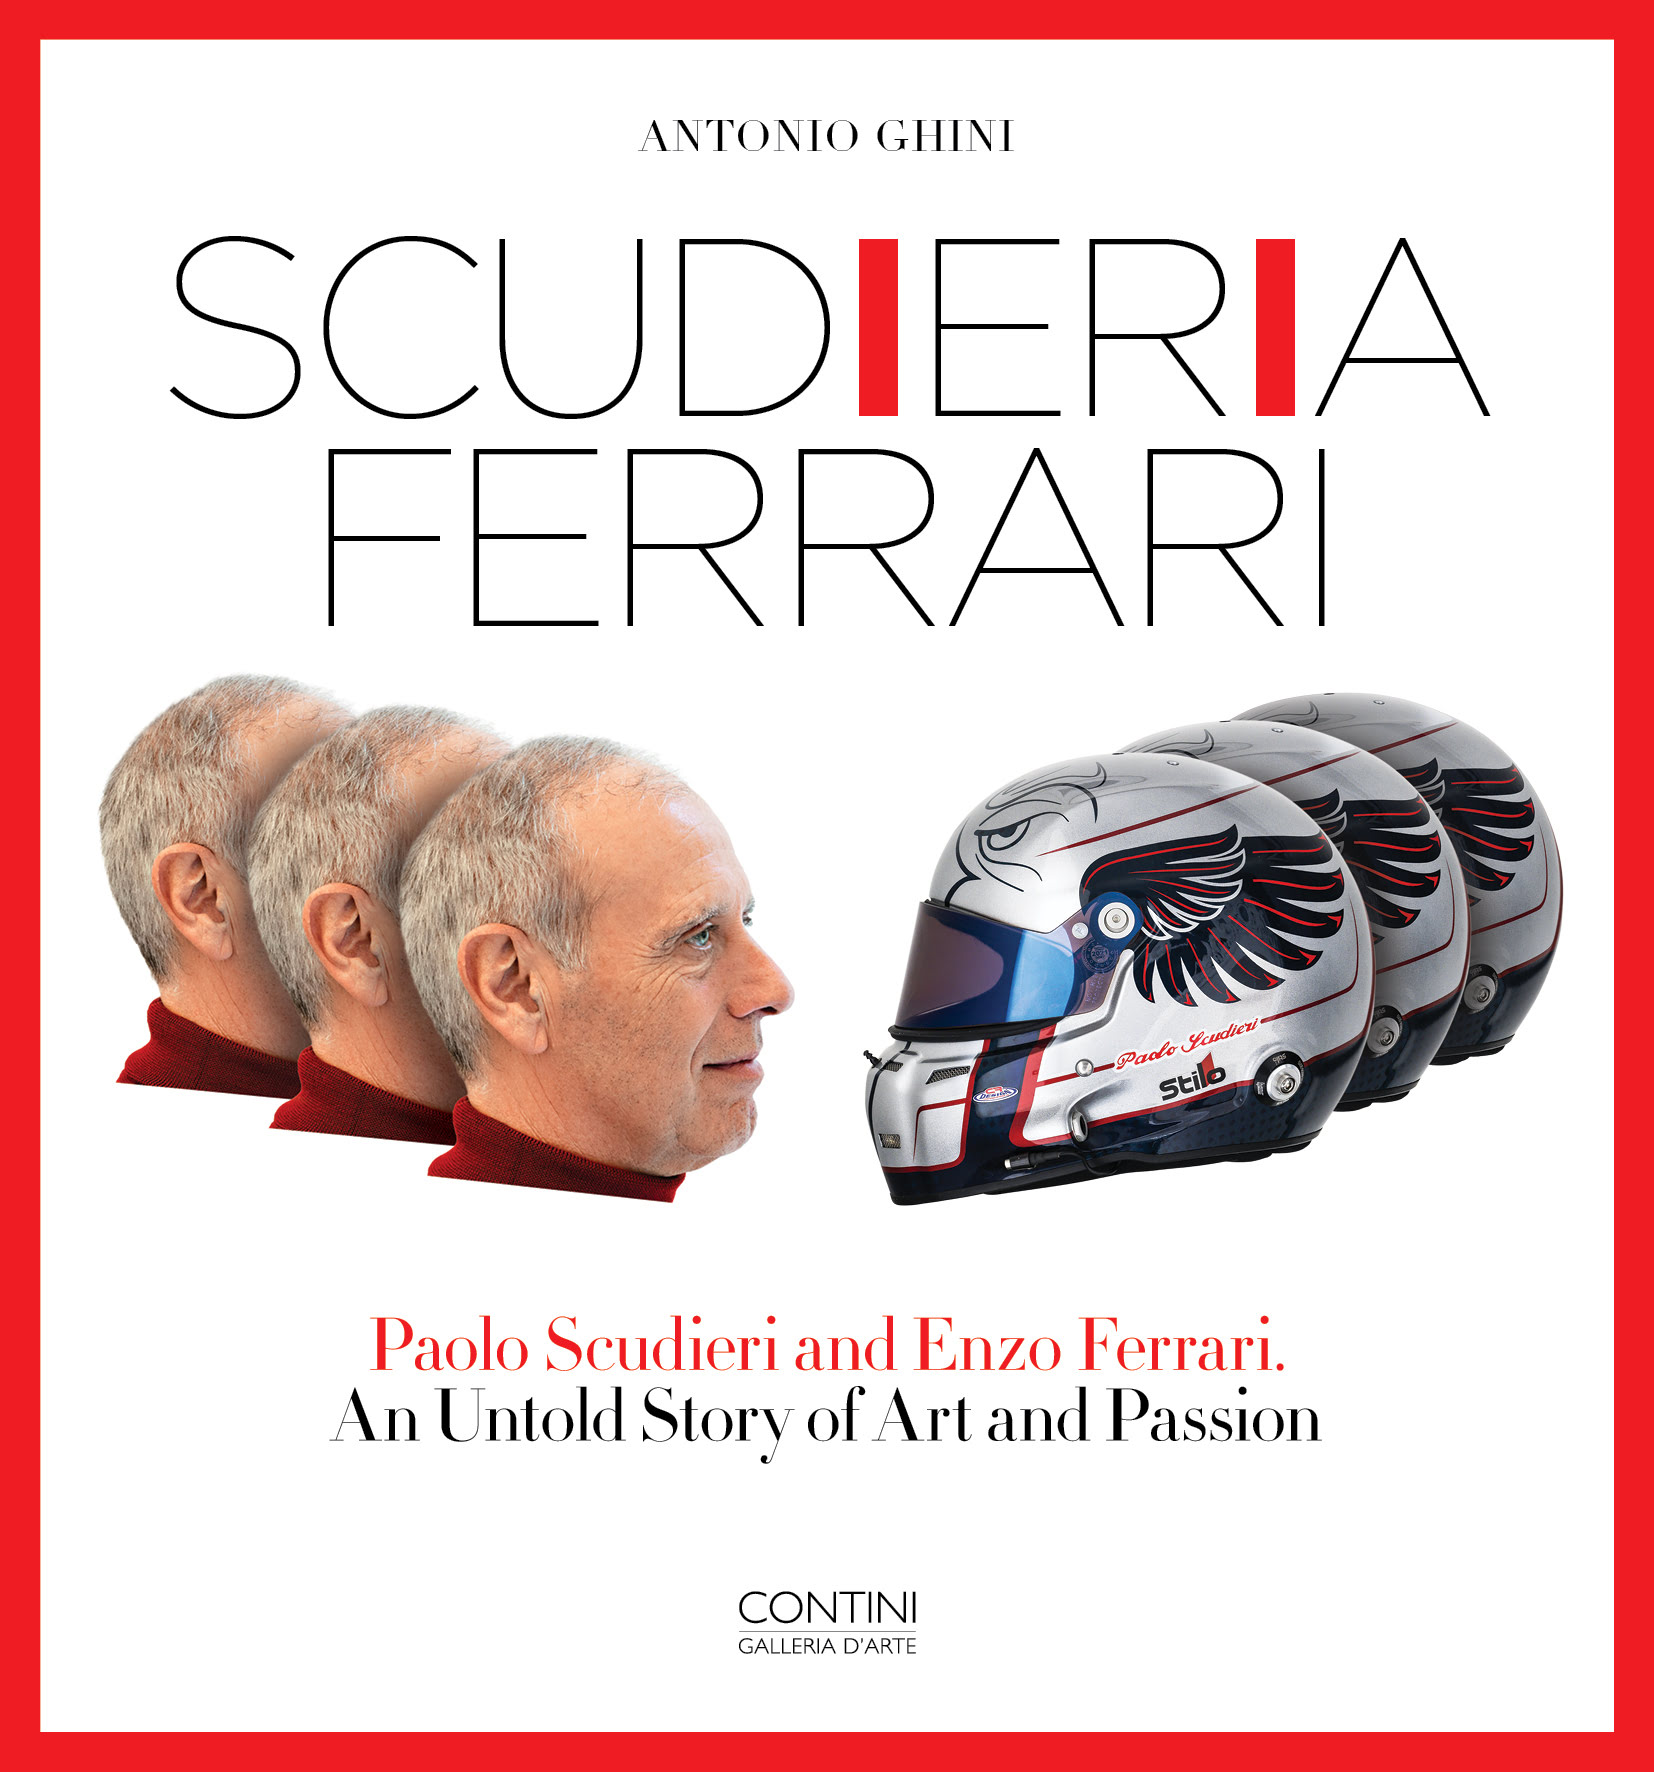 25 works of art for a new story of Enzo Ferrari image